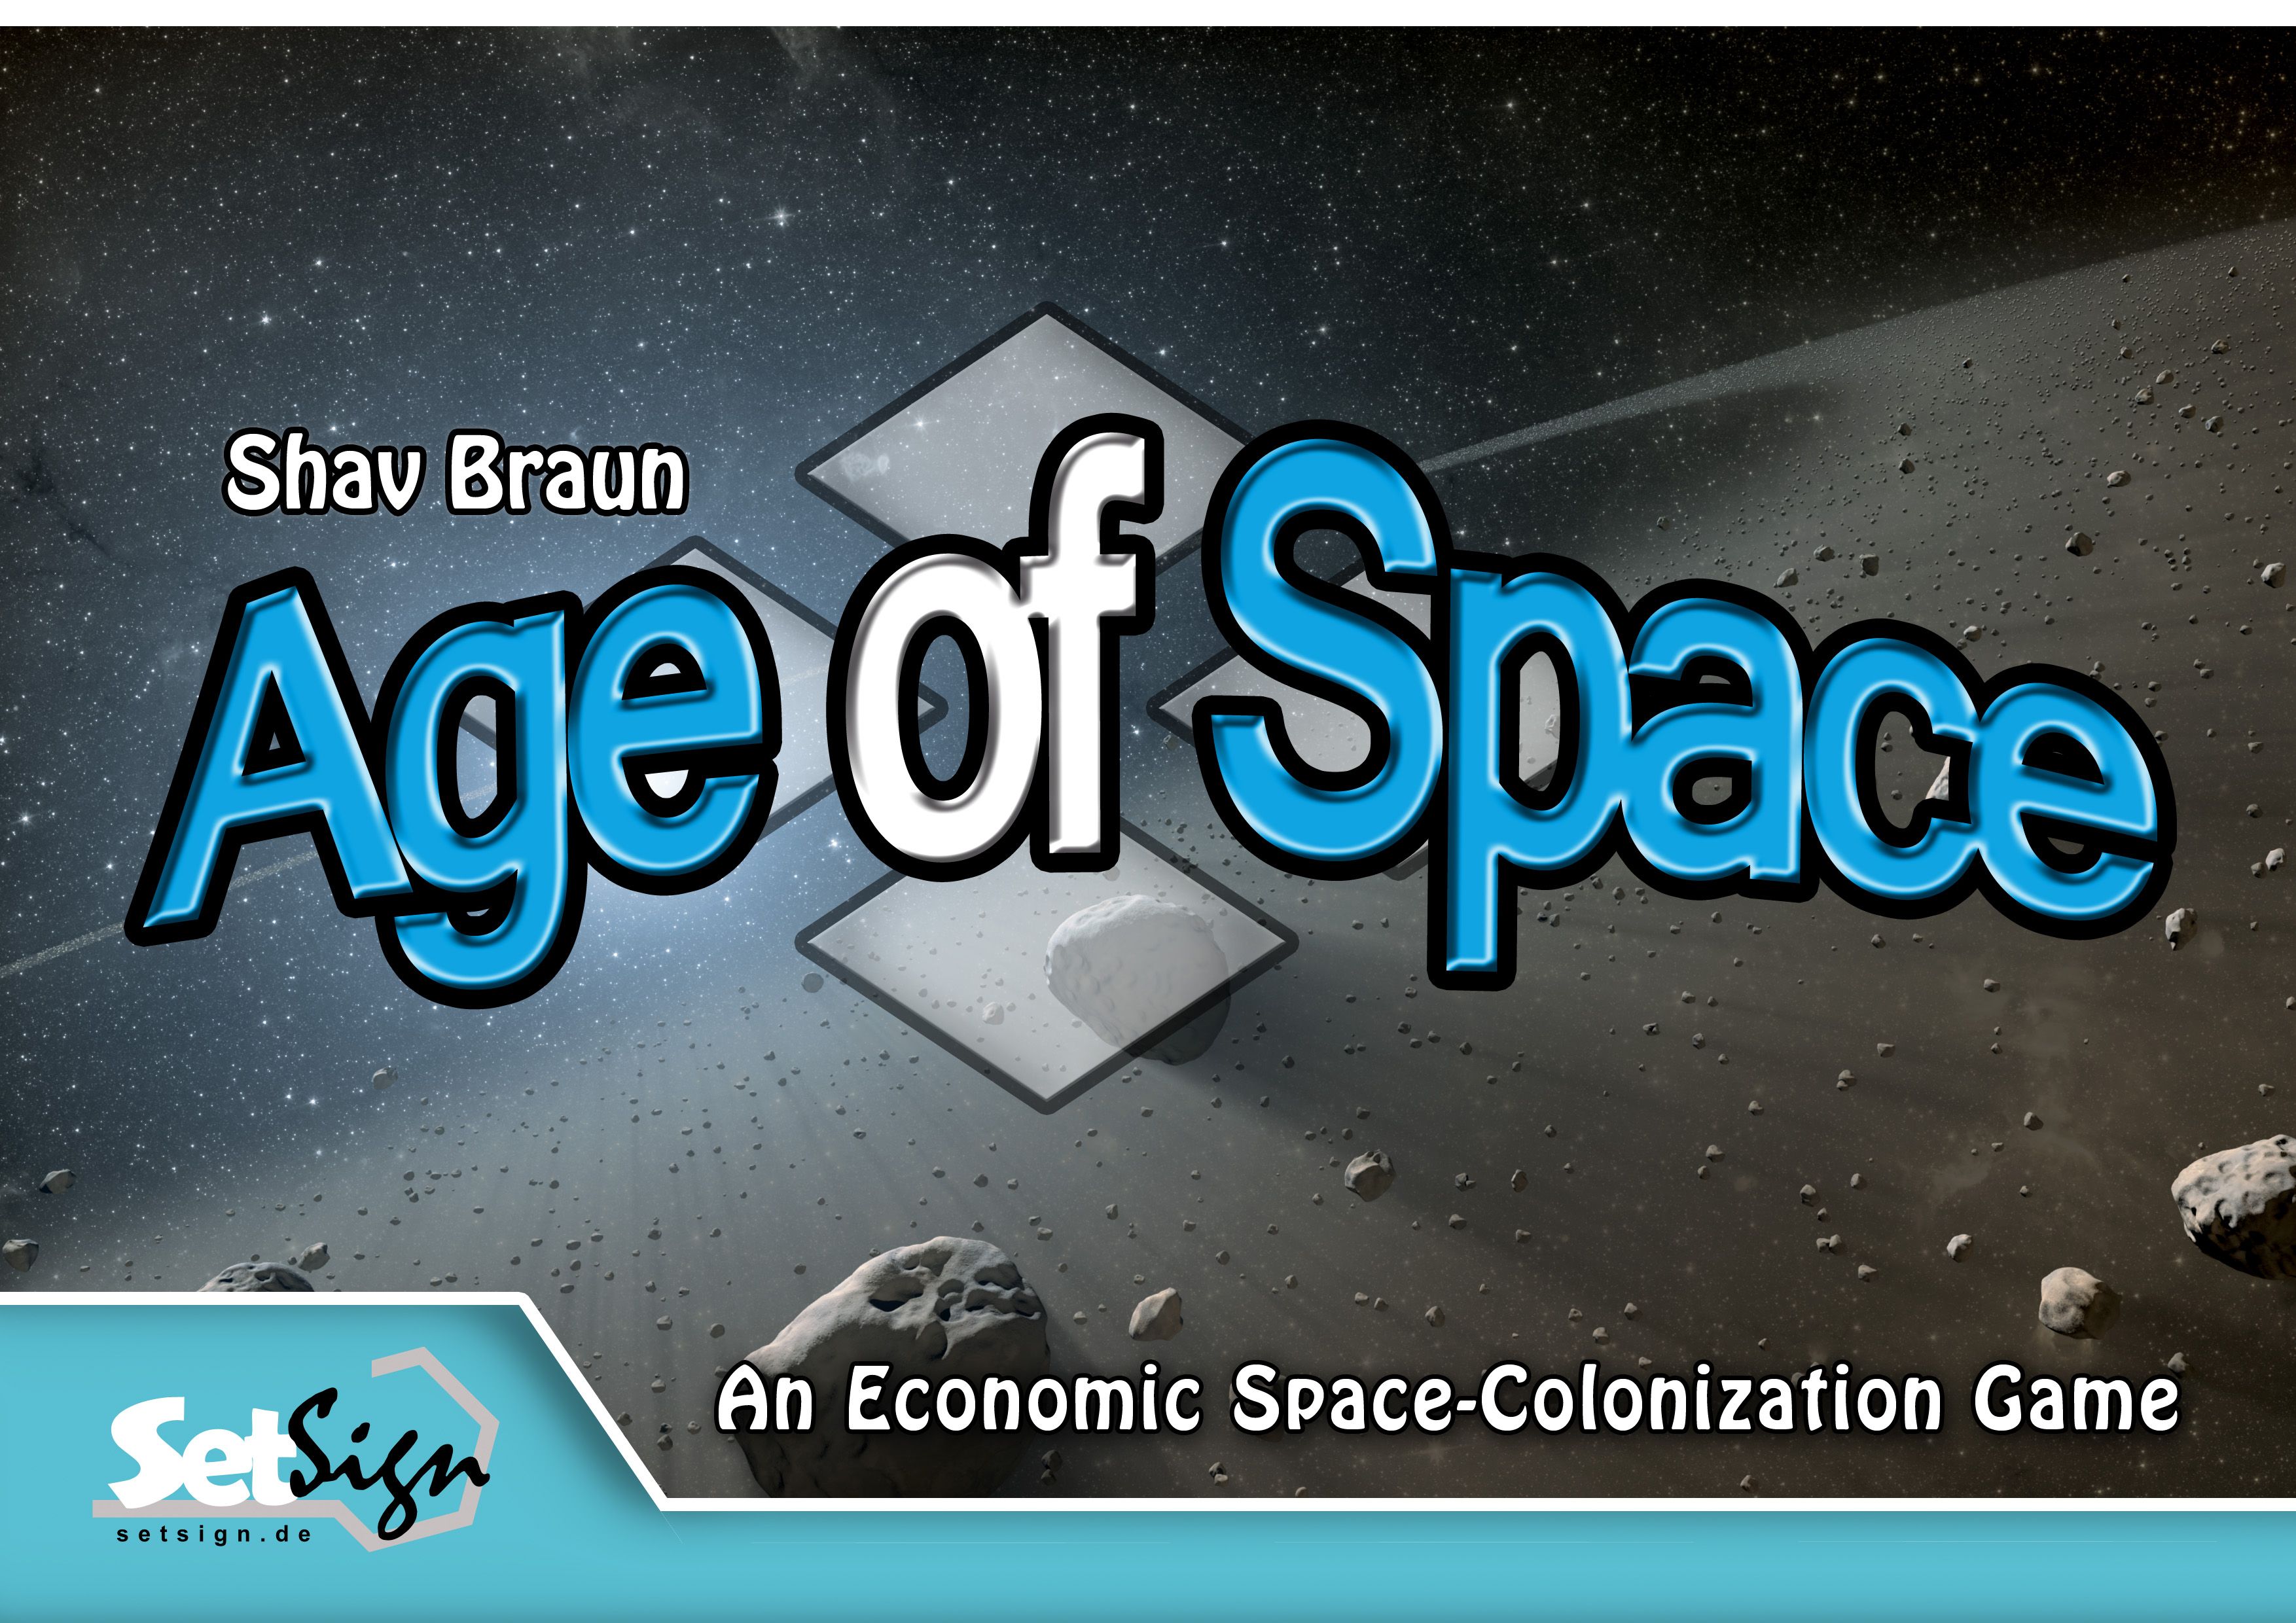 Age of Space